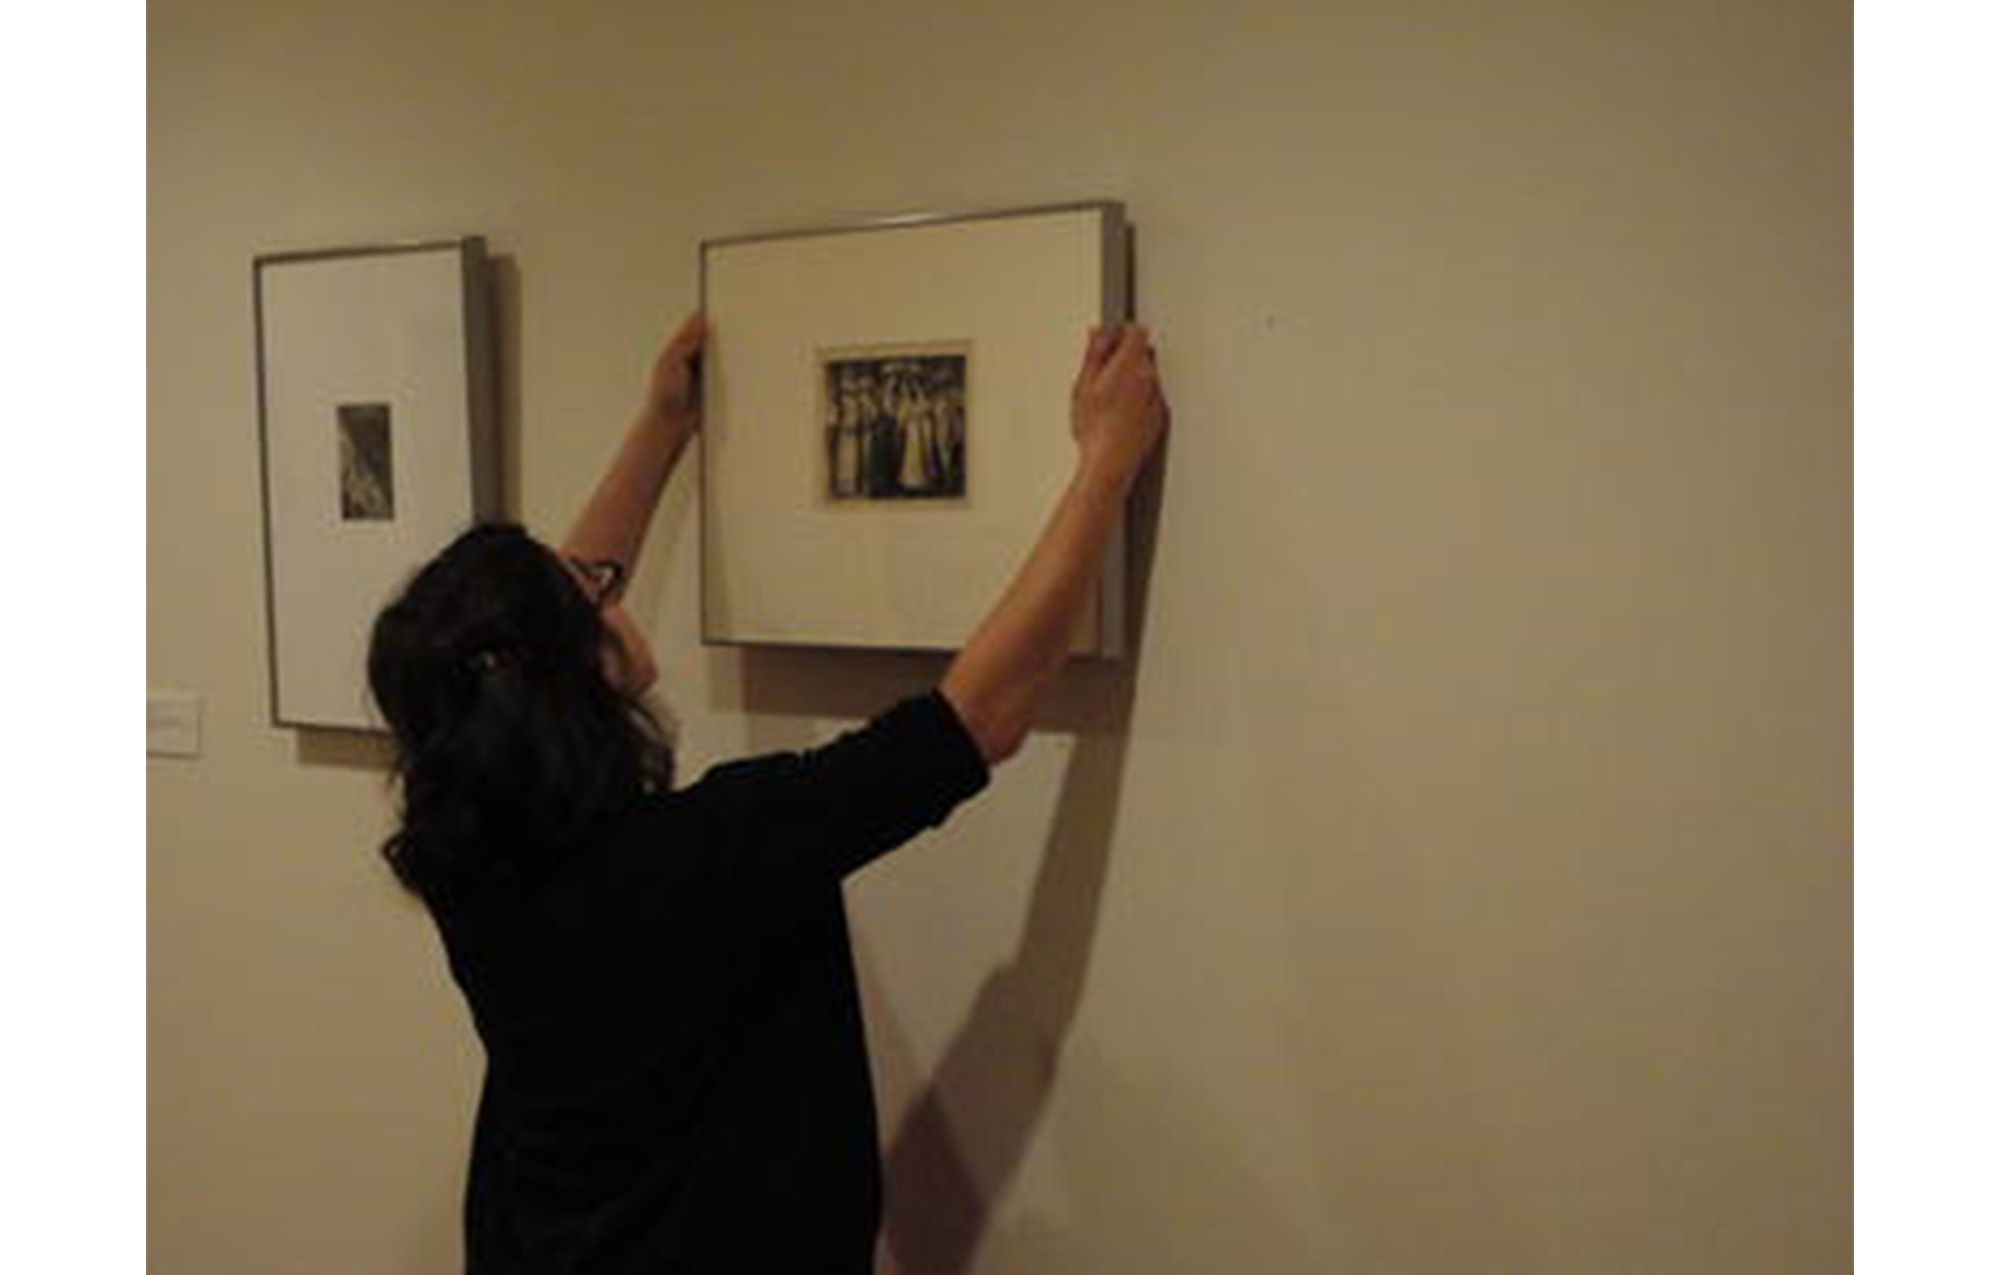 woman with dark hair and classes stands in an art gallery, hanging a print on the wall to the right of another print that is already hung on the wall